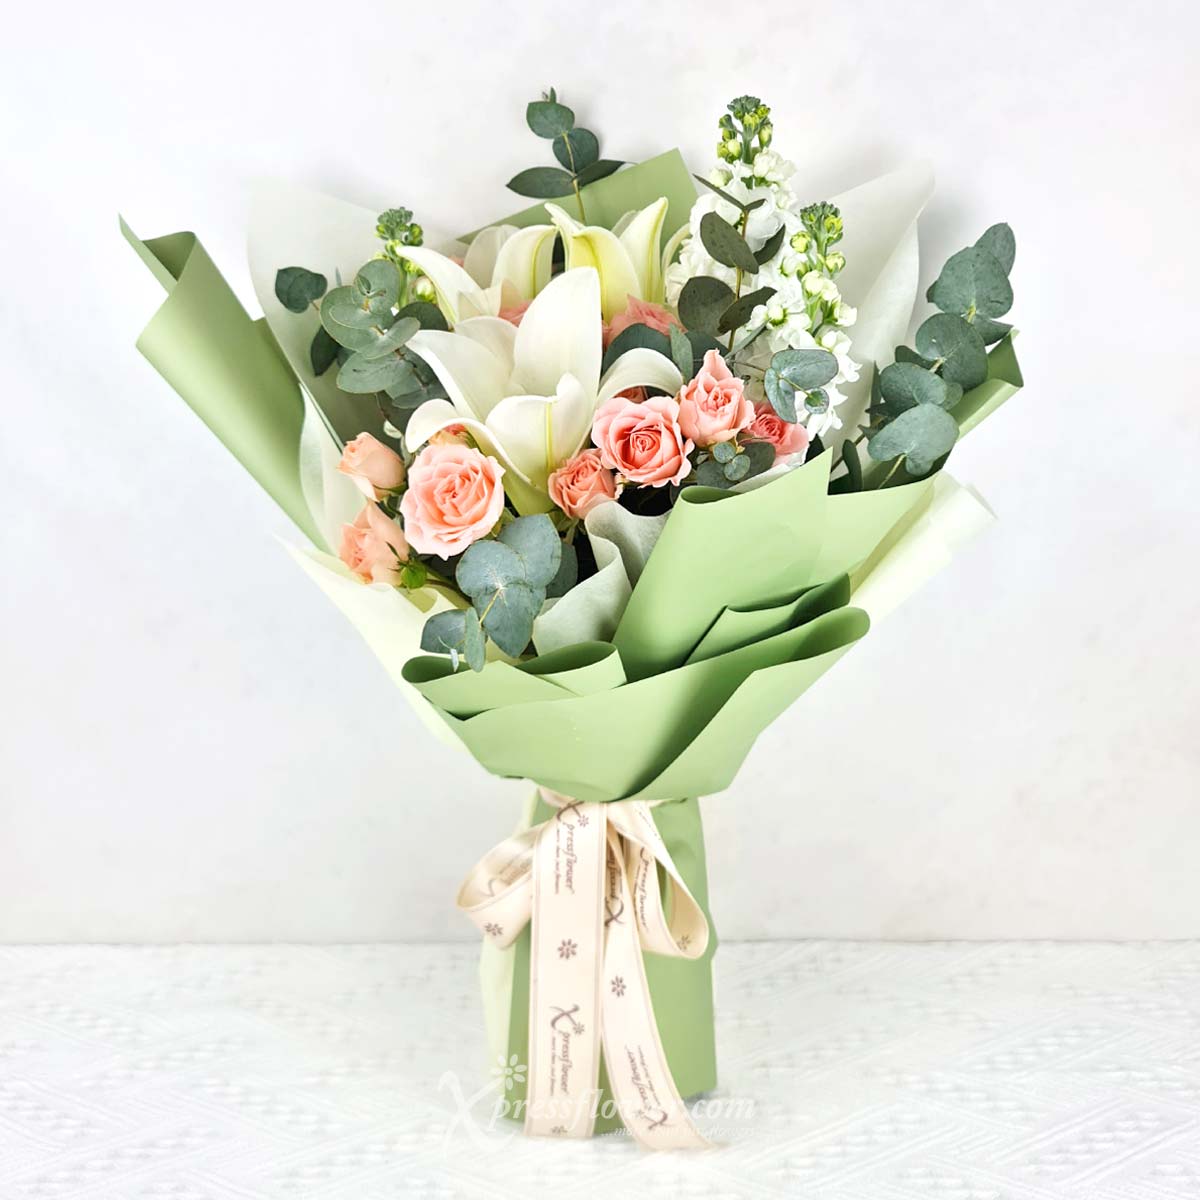 Lily Serenity (3 White Lilies with Pink Rose Sprays)